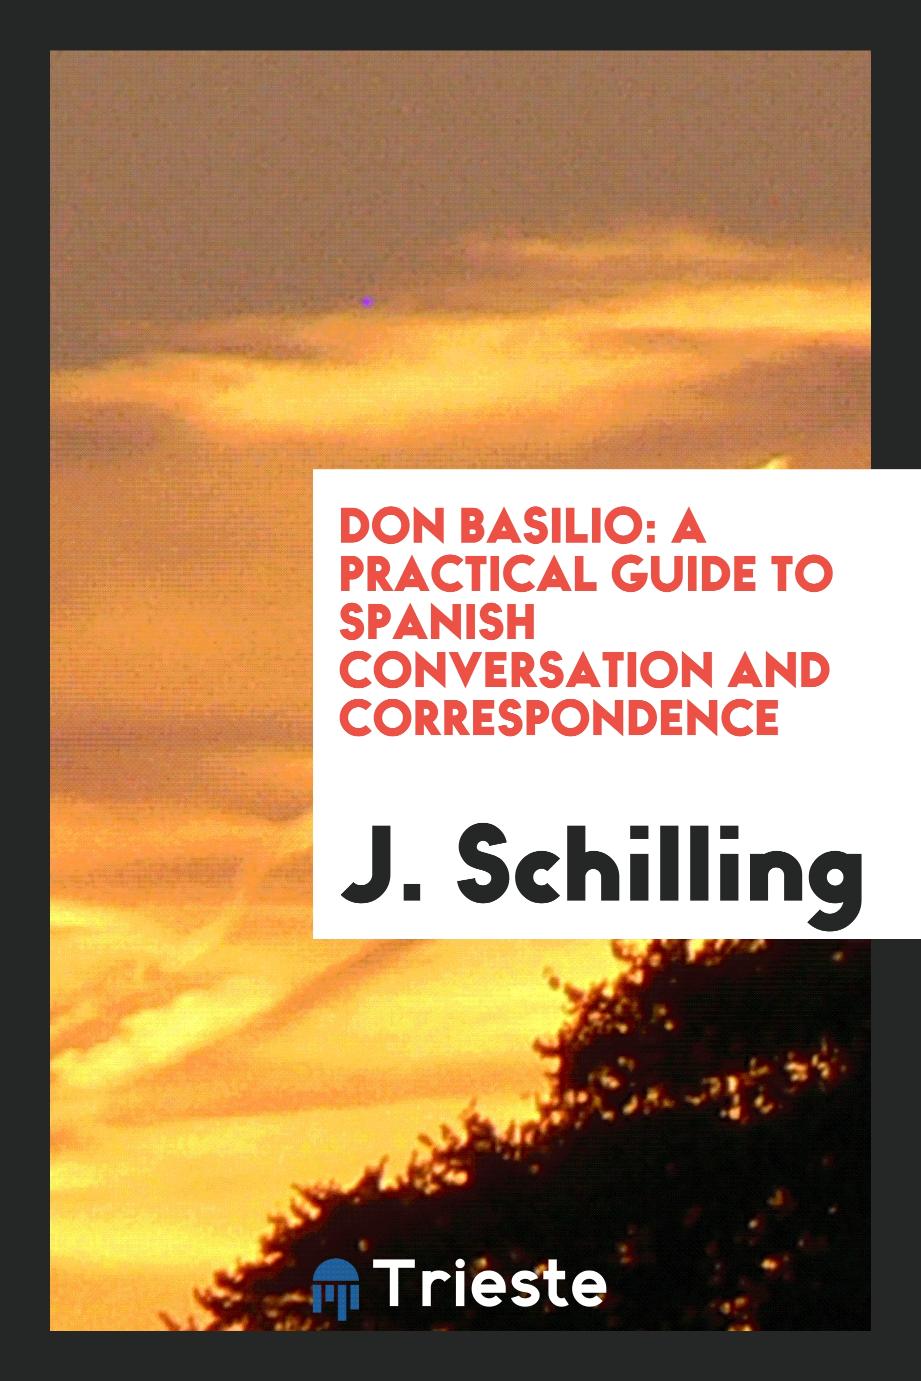 Don Basilio: A Practical Guide to Spanish Conversation And Correspondence